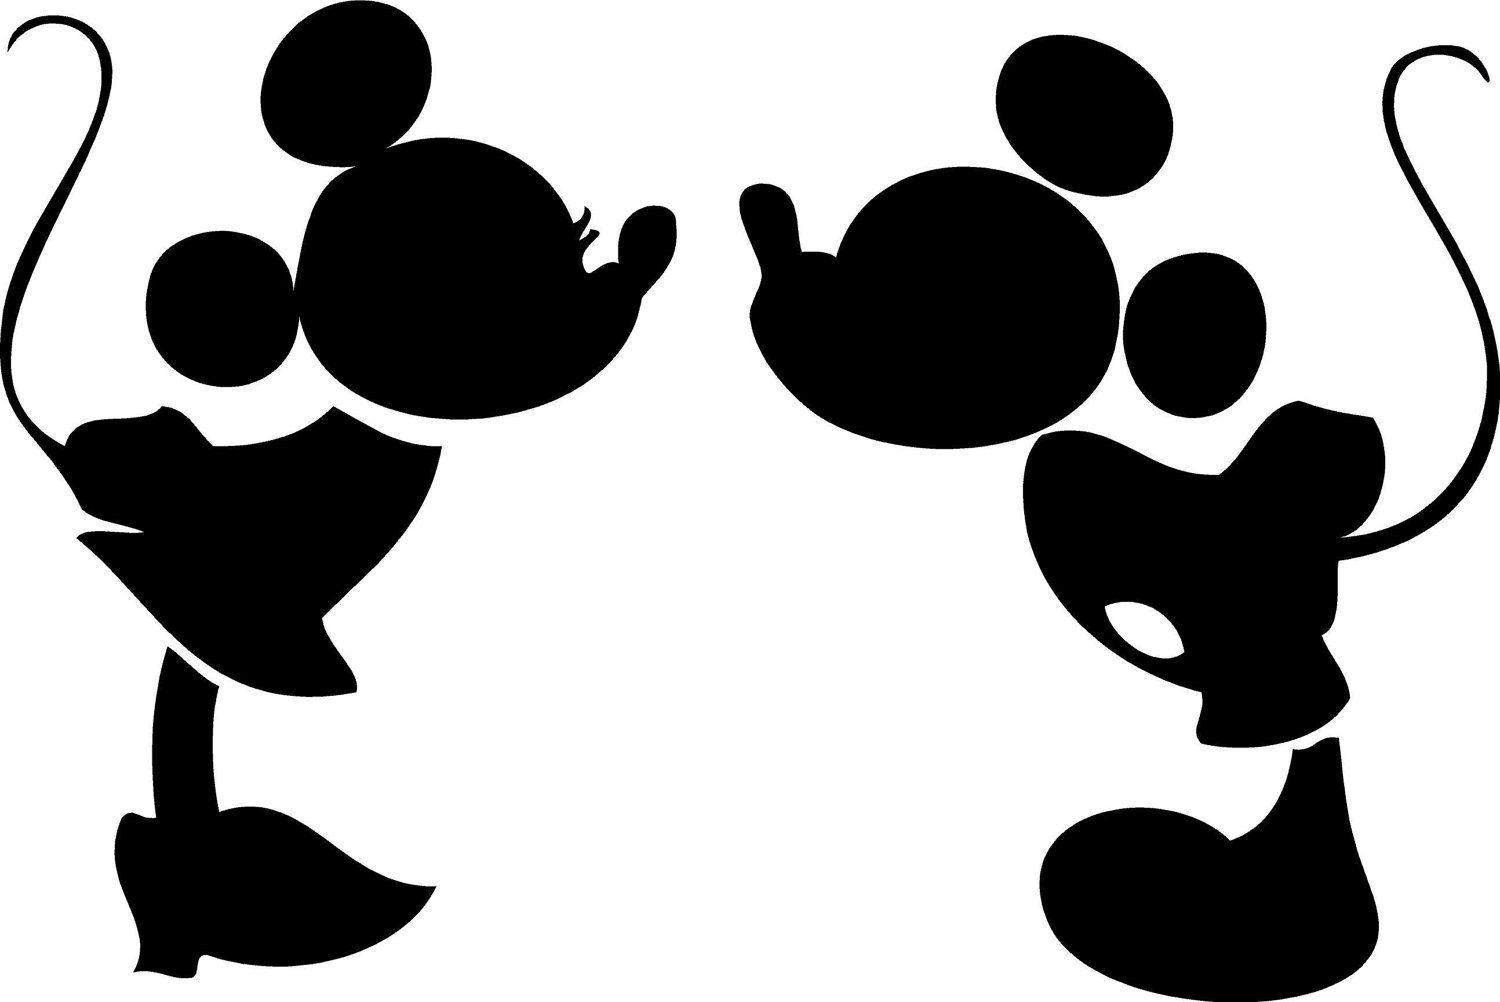 Mickey Mouse Silhouette Computer Wallpapers - Top Free Mickey ...